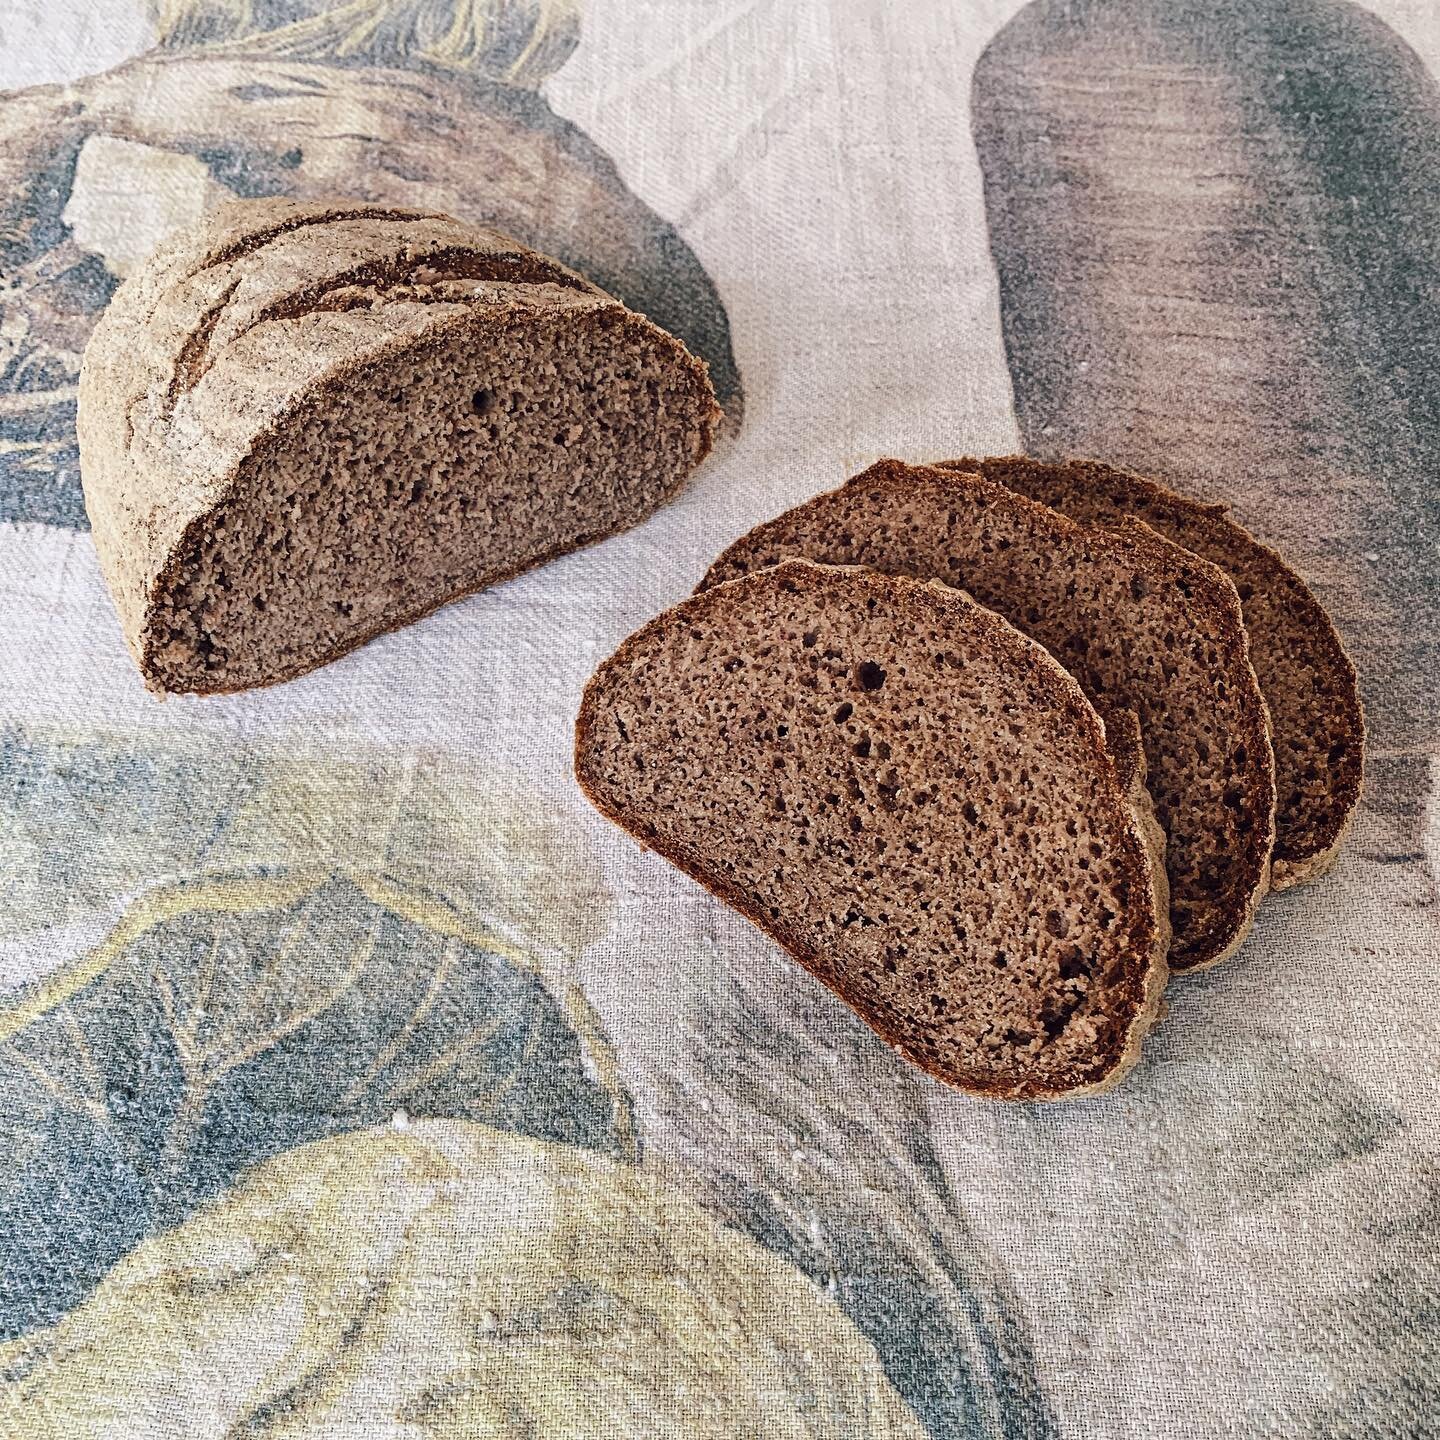 Our gluten free sourdough is improving everyday and we are so thrilled with the consistency and crumb || We take food allergies and dietary requirements solemnly so you can rest easy with a plate from us || We bake two loaves a day so please phone ah